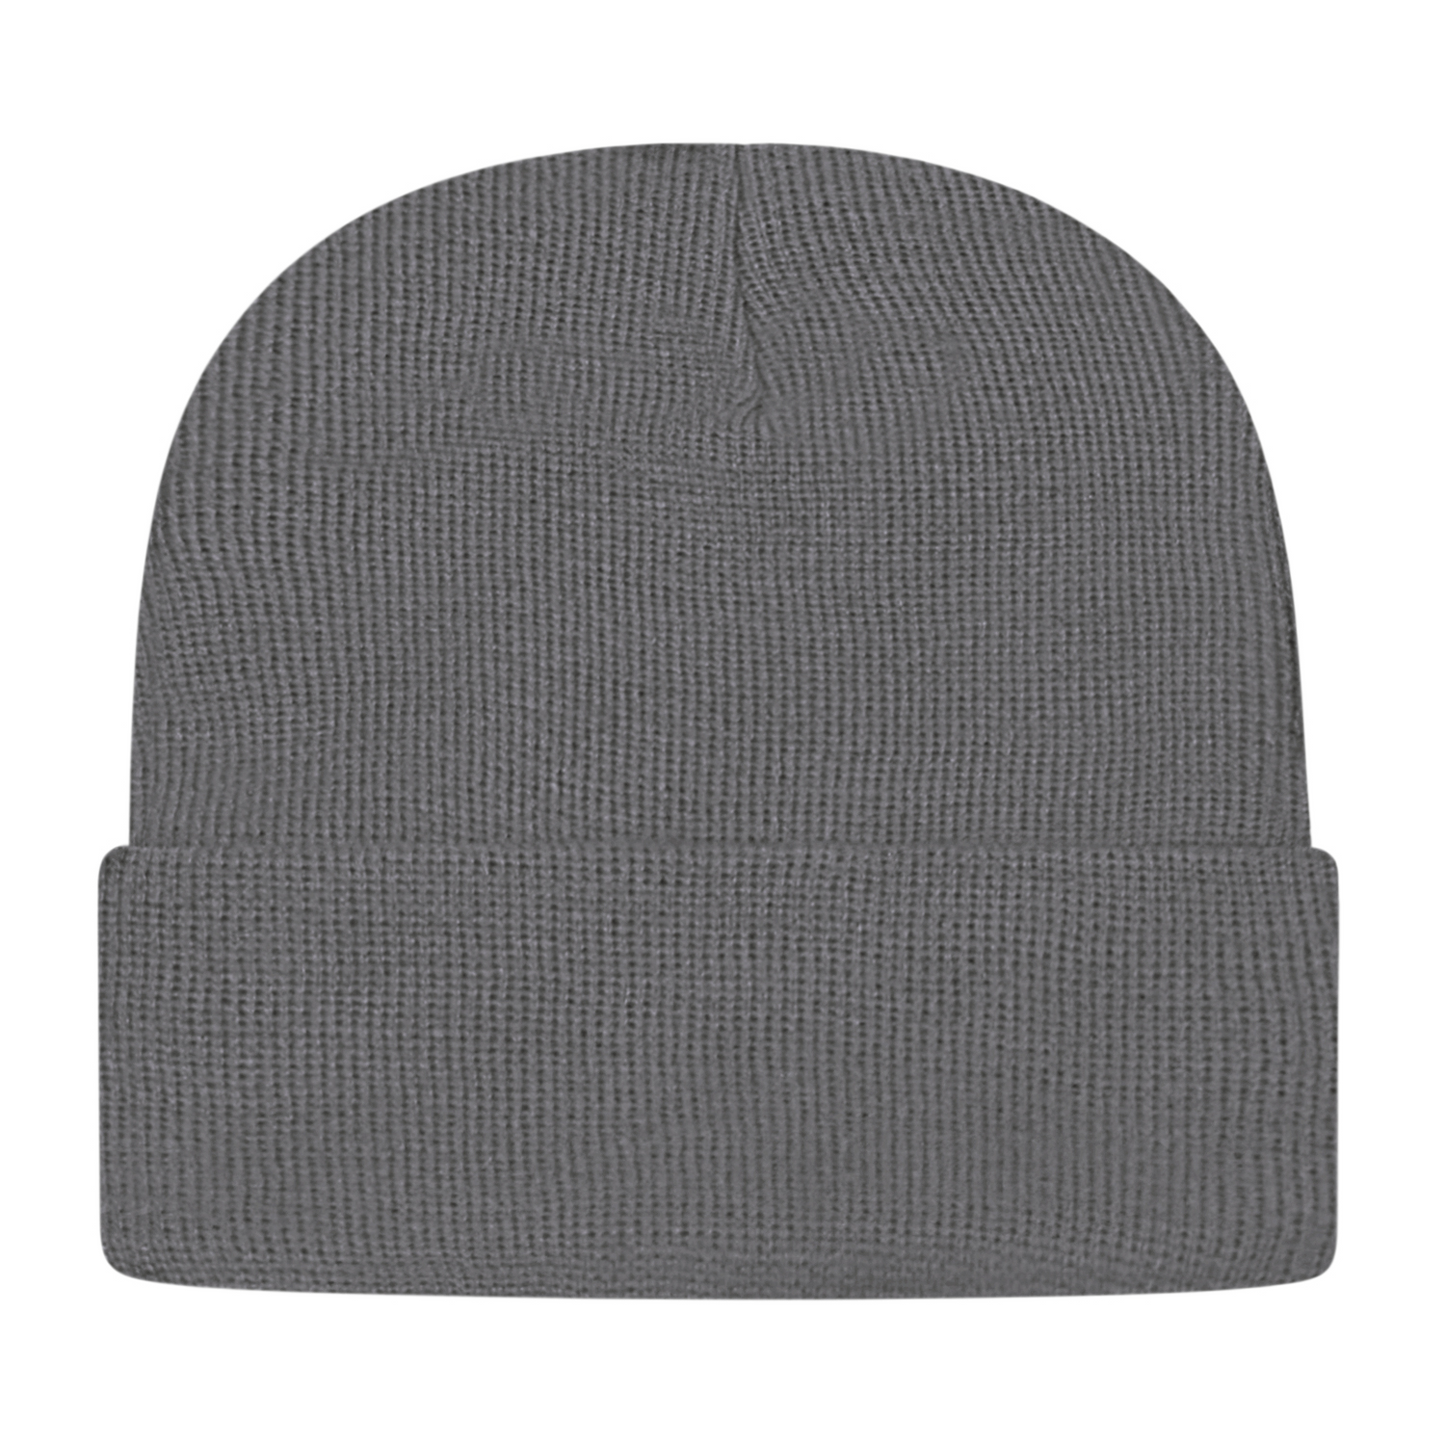 Sustainable Knit Cap with Cuff